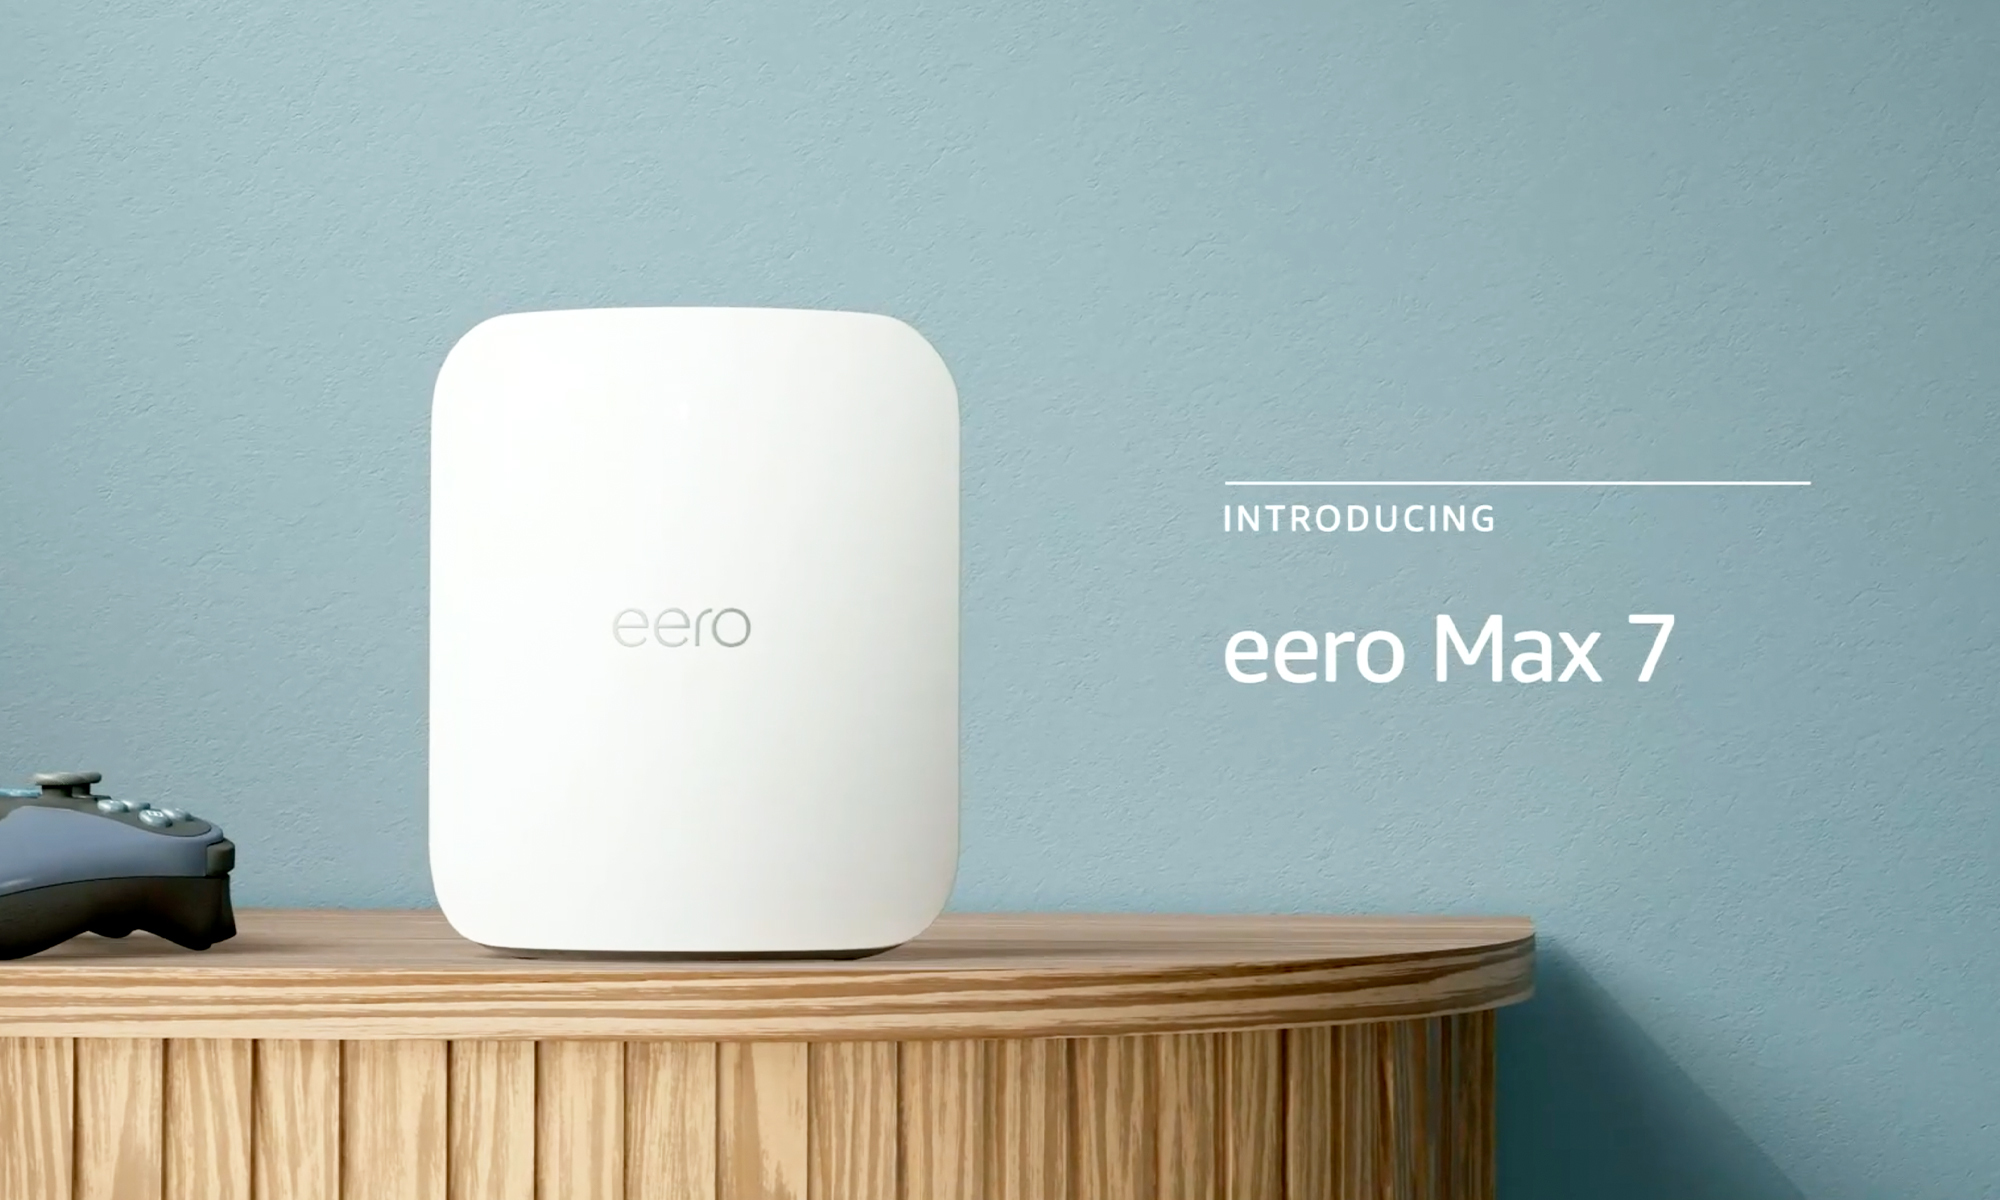 Amazon product photo of the Eero Max 7 Wi-Fi router. It sits on a stand next to a gaming controller. The superimposed text 